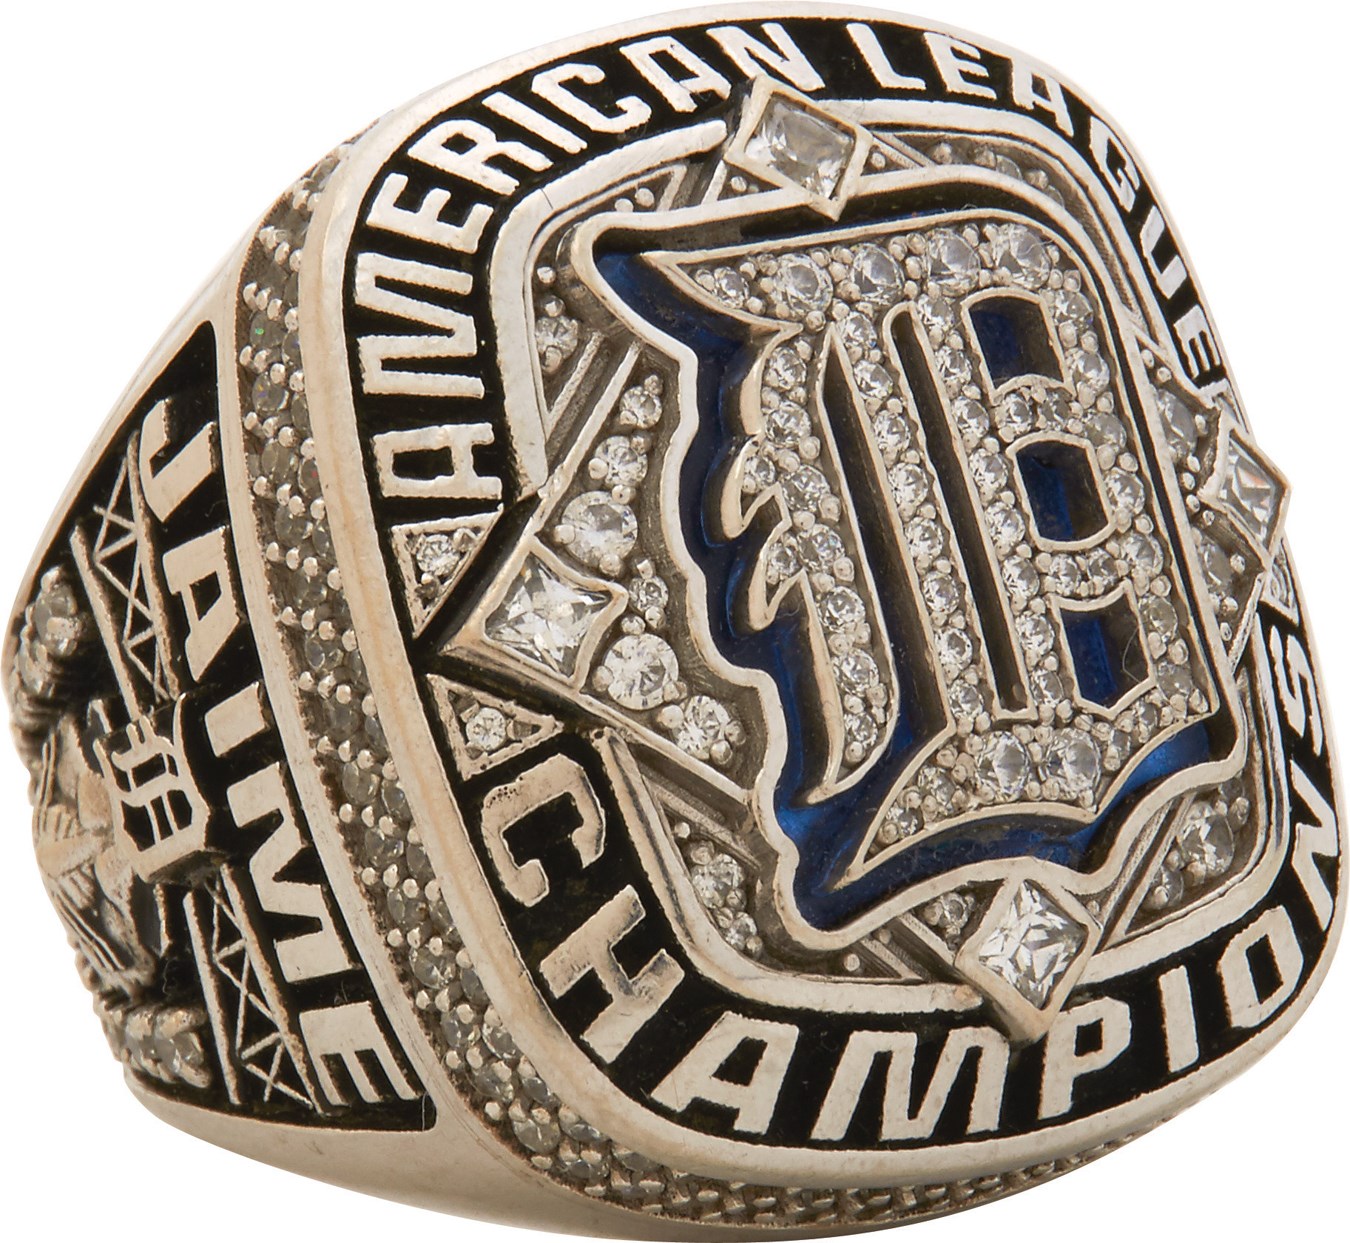 Sports Rings And Awards - 2012 Detroit Tigers American League Championship Ring with Original Box